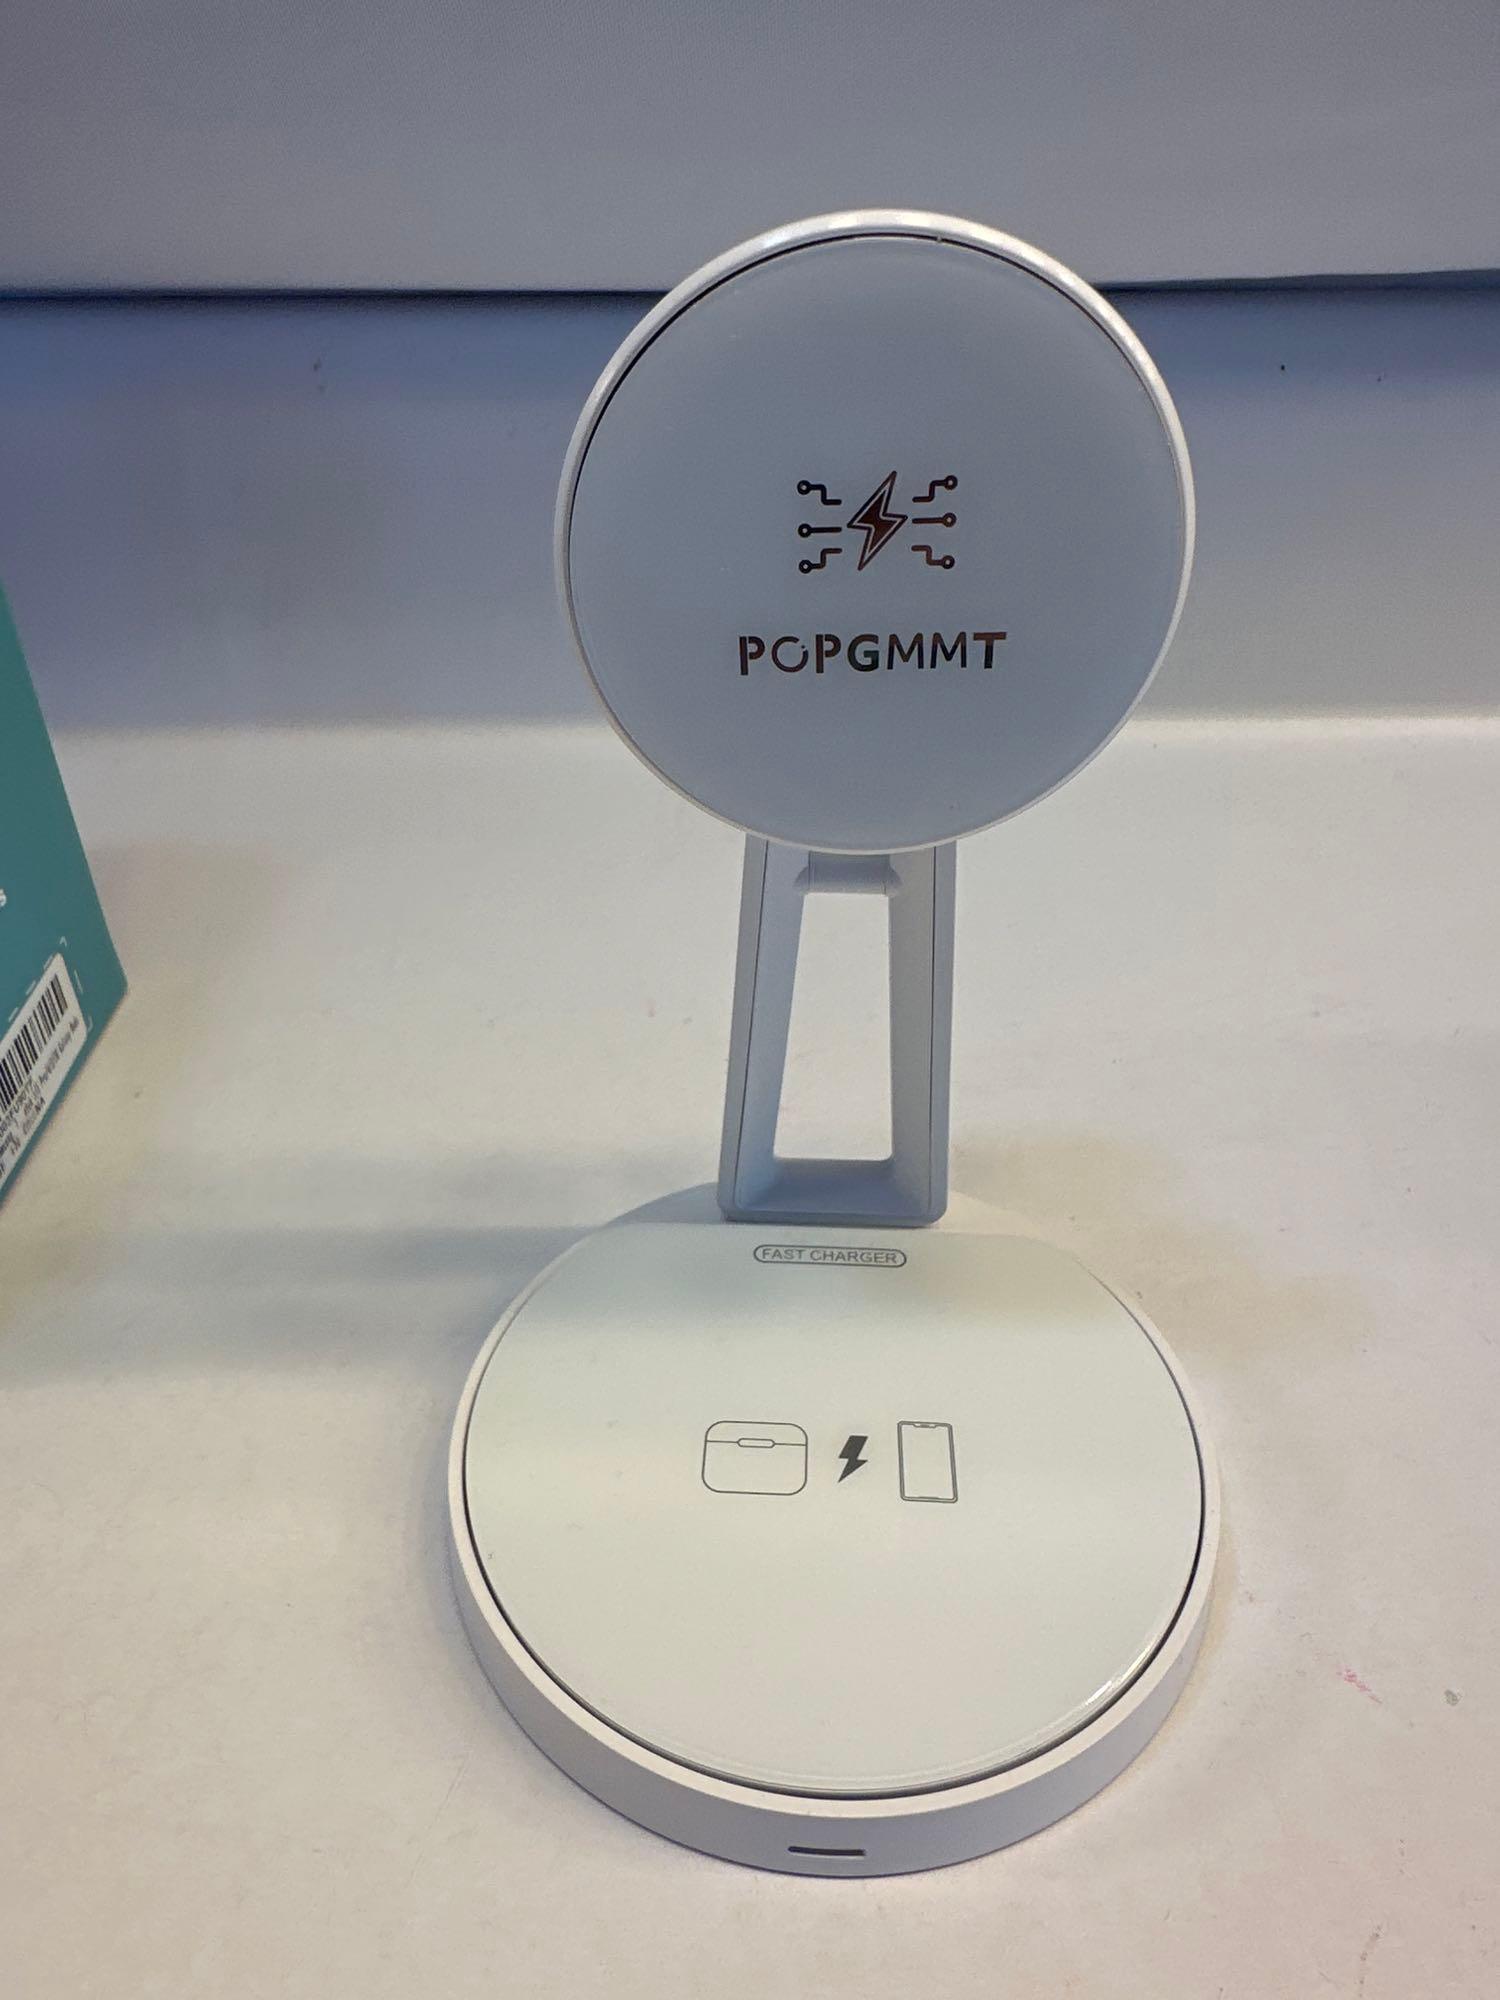 New 3 in 1 Magnetic Wireless Charger With Charger Adapter In Box